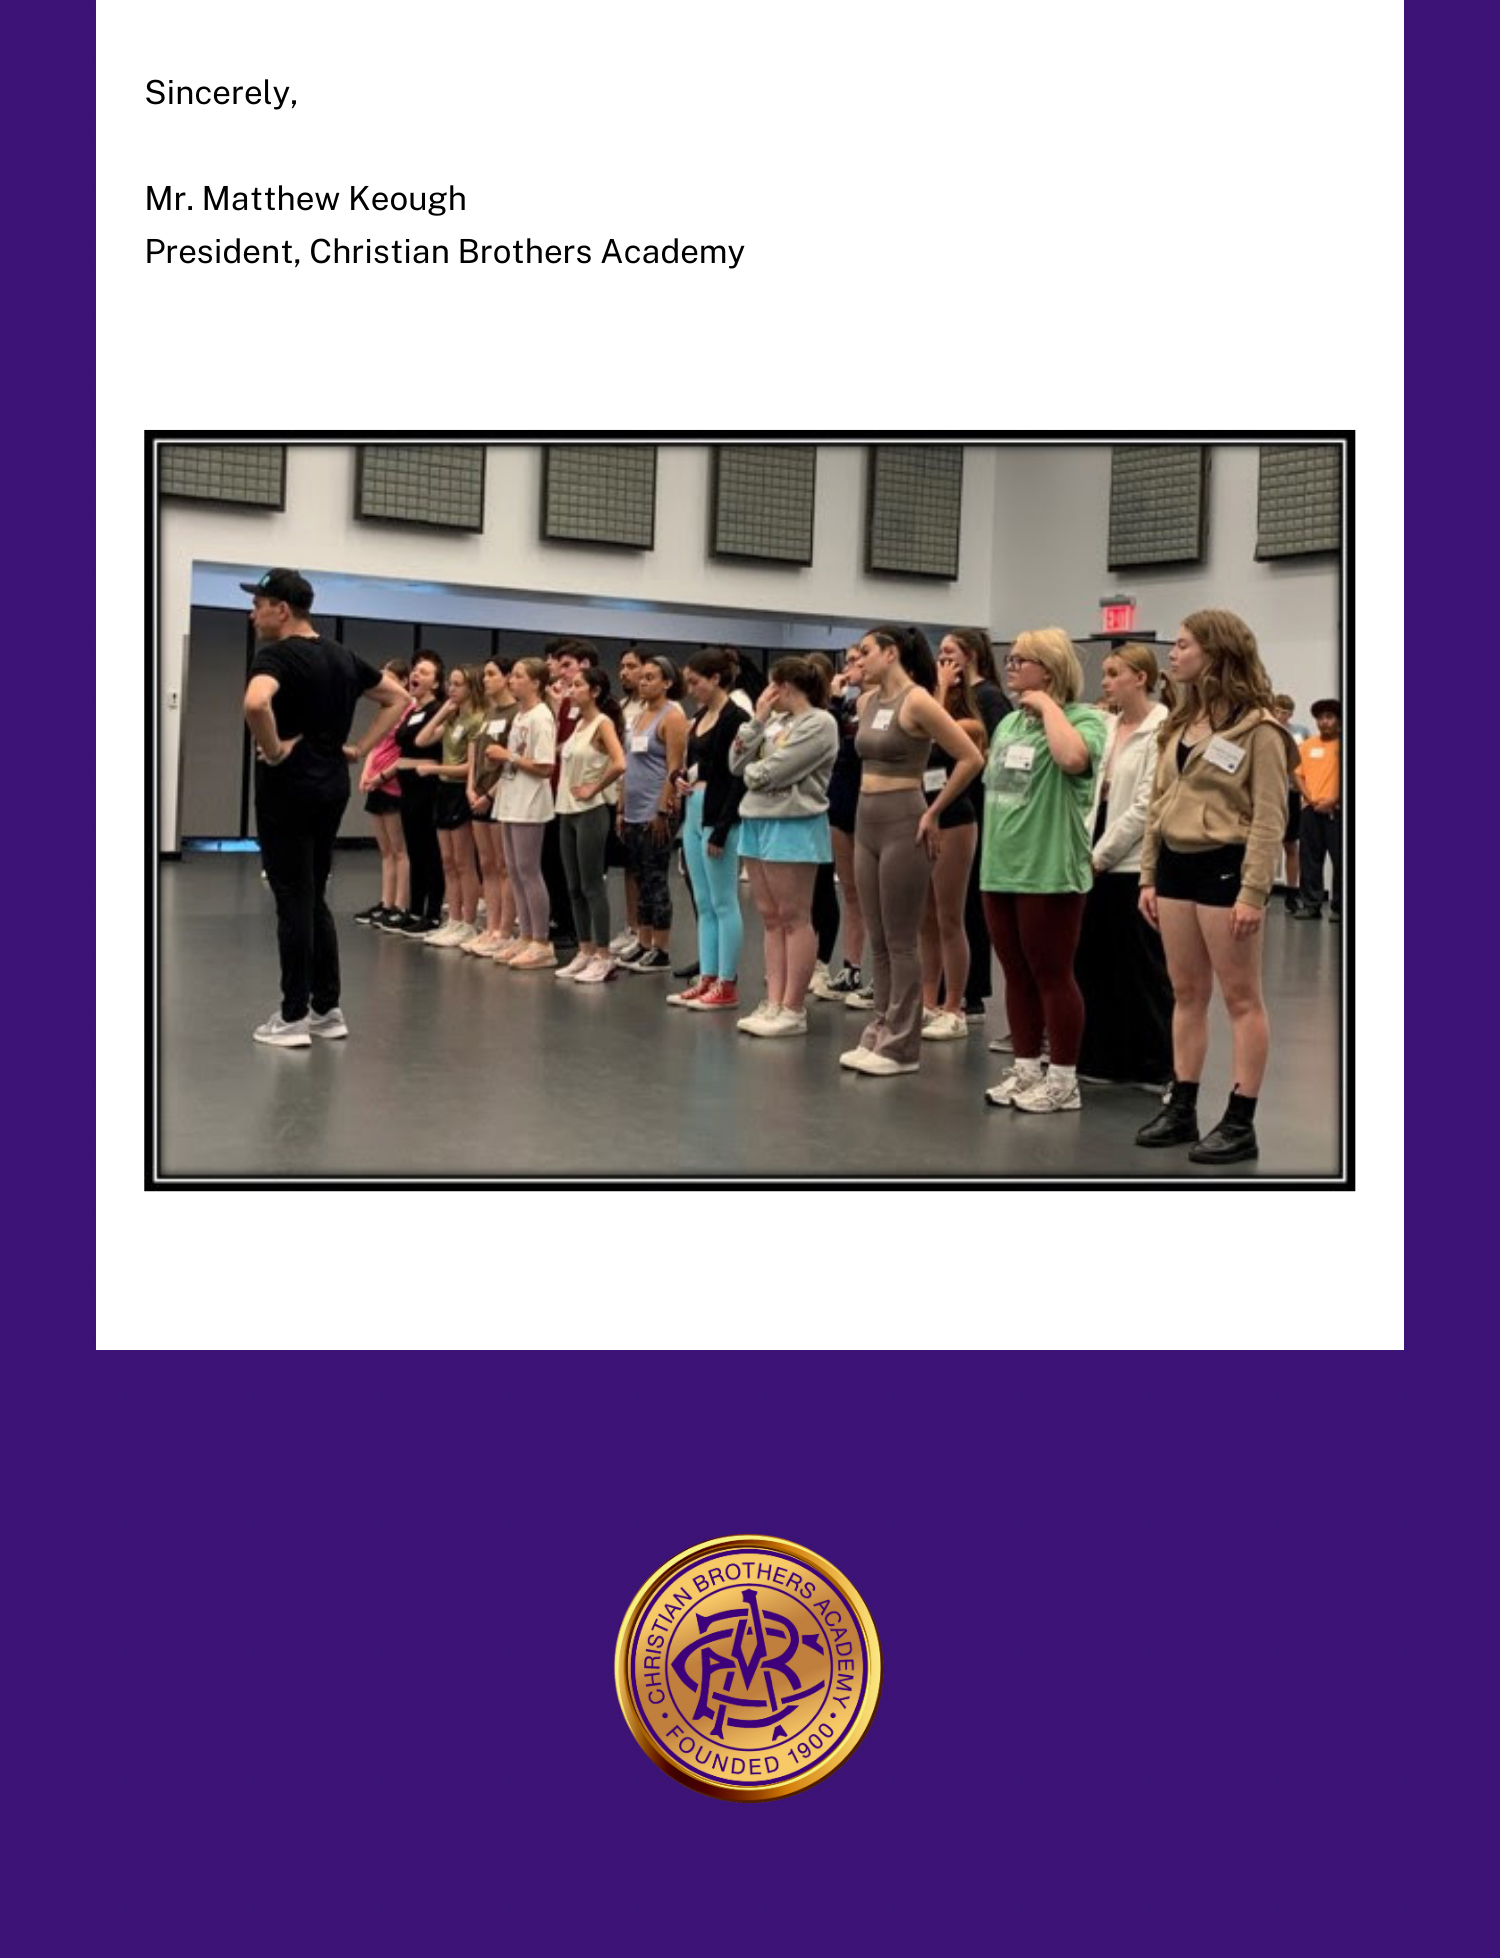 Students at Christian Brothers Academy  immersed themselves in masterclasses led by some of Broadway’s best vocal coaches, acting teachers, and choreographers.